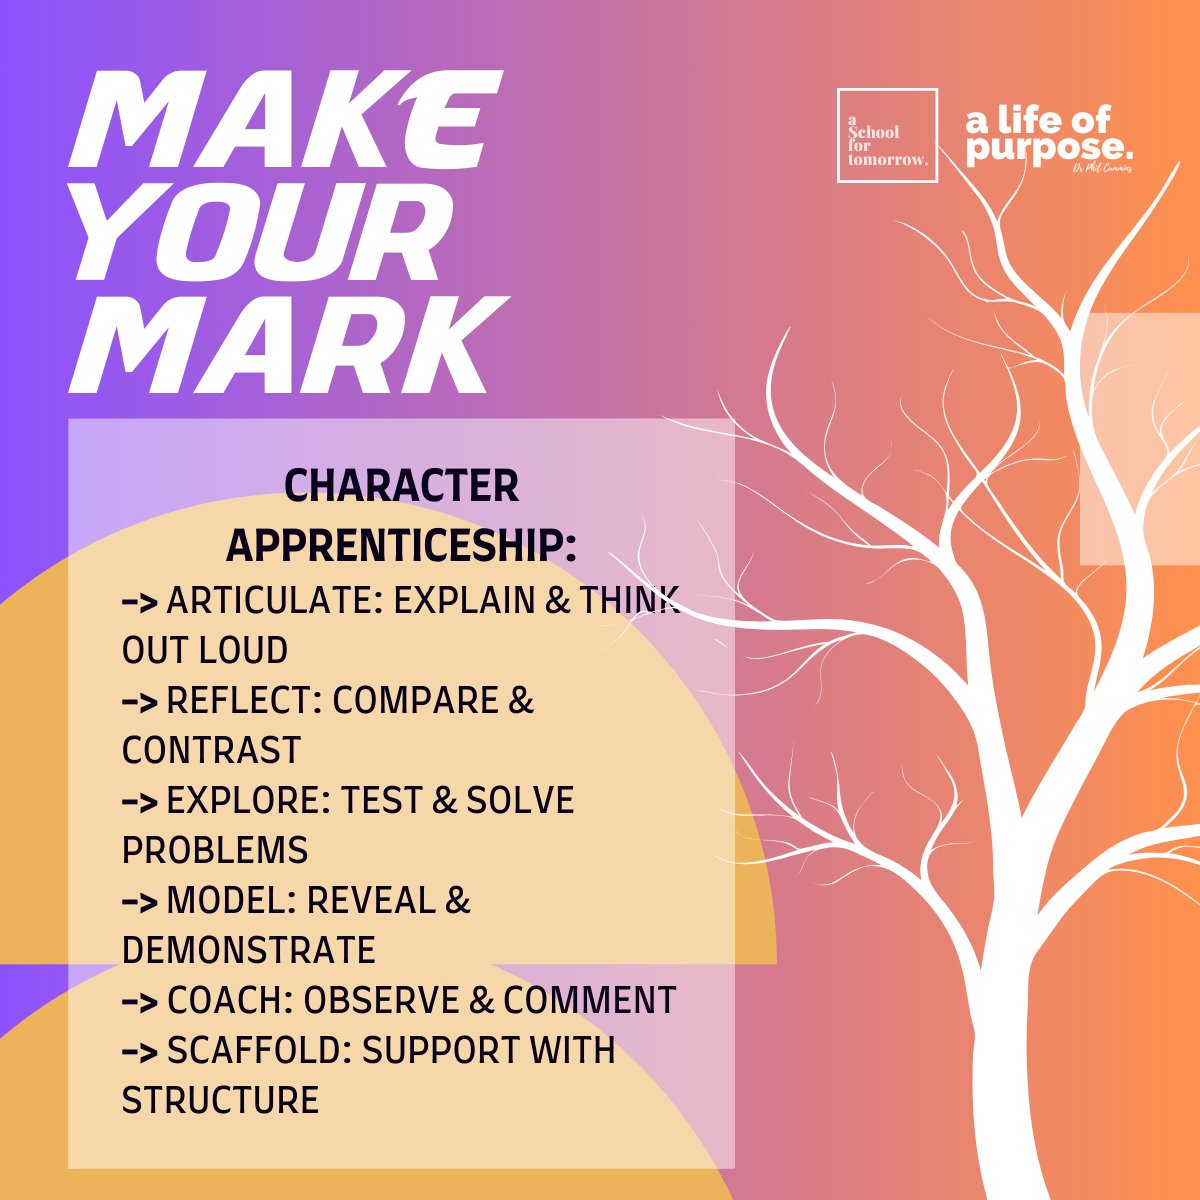 In relationship with a trusted expert, boys learn from others, learn with others, do it themselves and then share what they have learned as they grow into expertise in their own right, carrying on the legacy that was handed down to them.

#makeyourmark #apprenticeship #letsgo